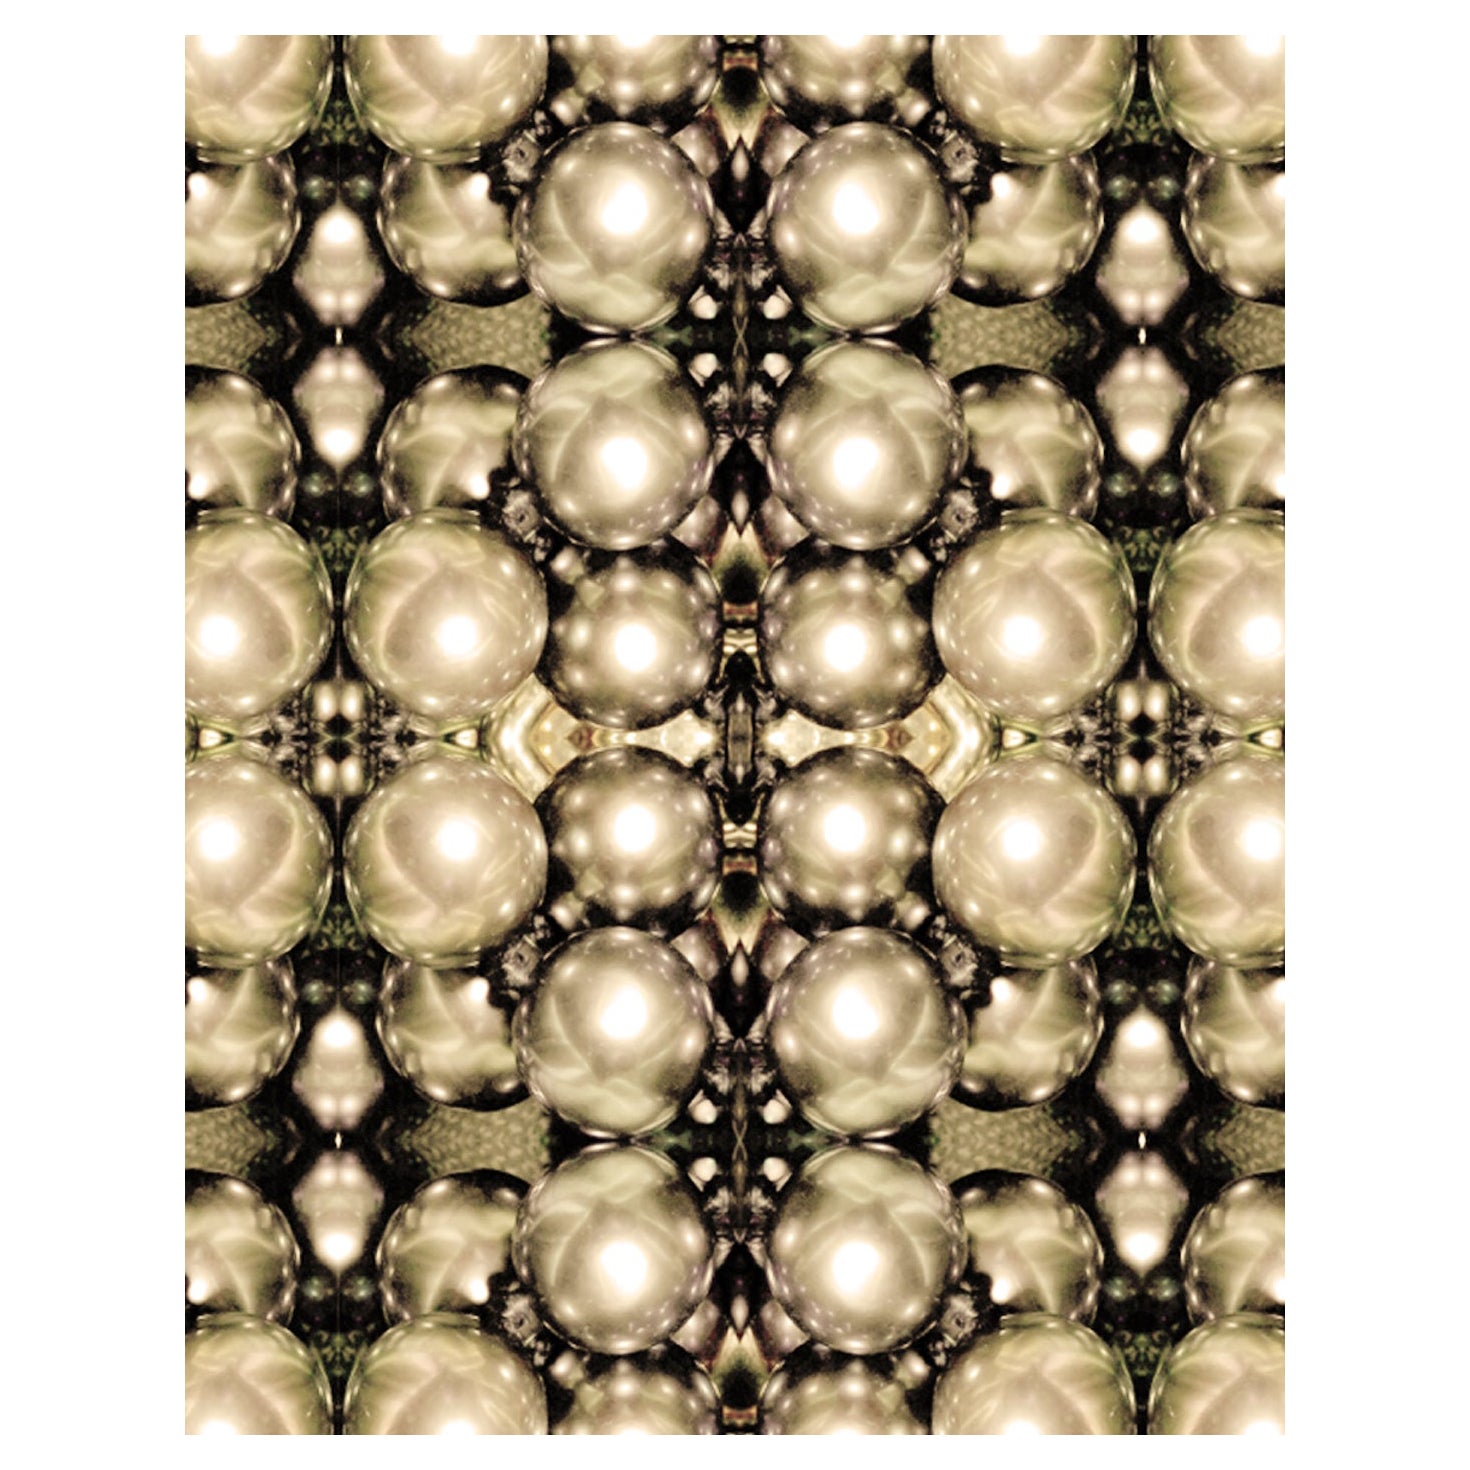 EDGE Collections Overlapping Black Pearls Sepia from our Collection no 1